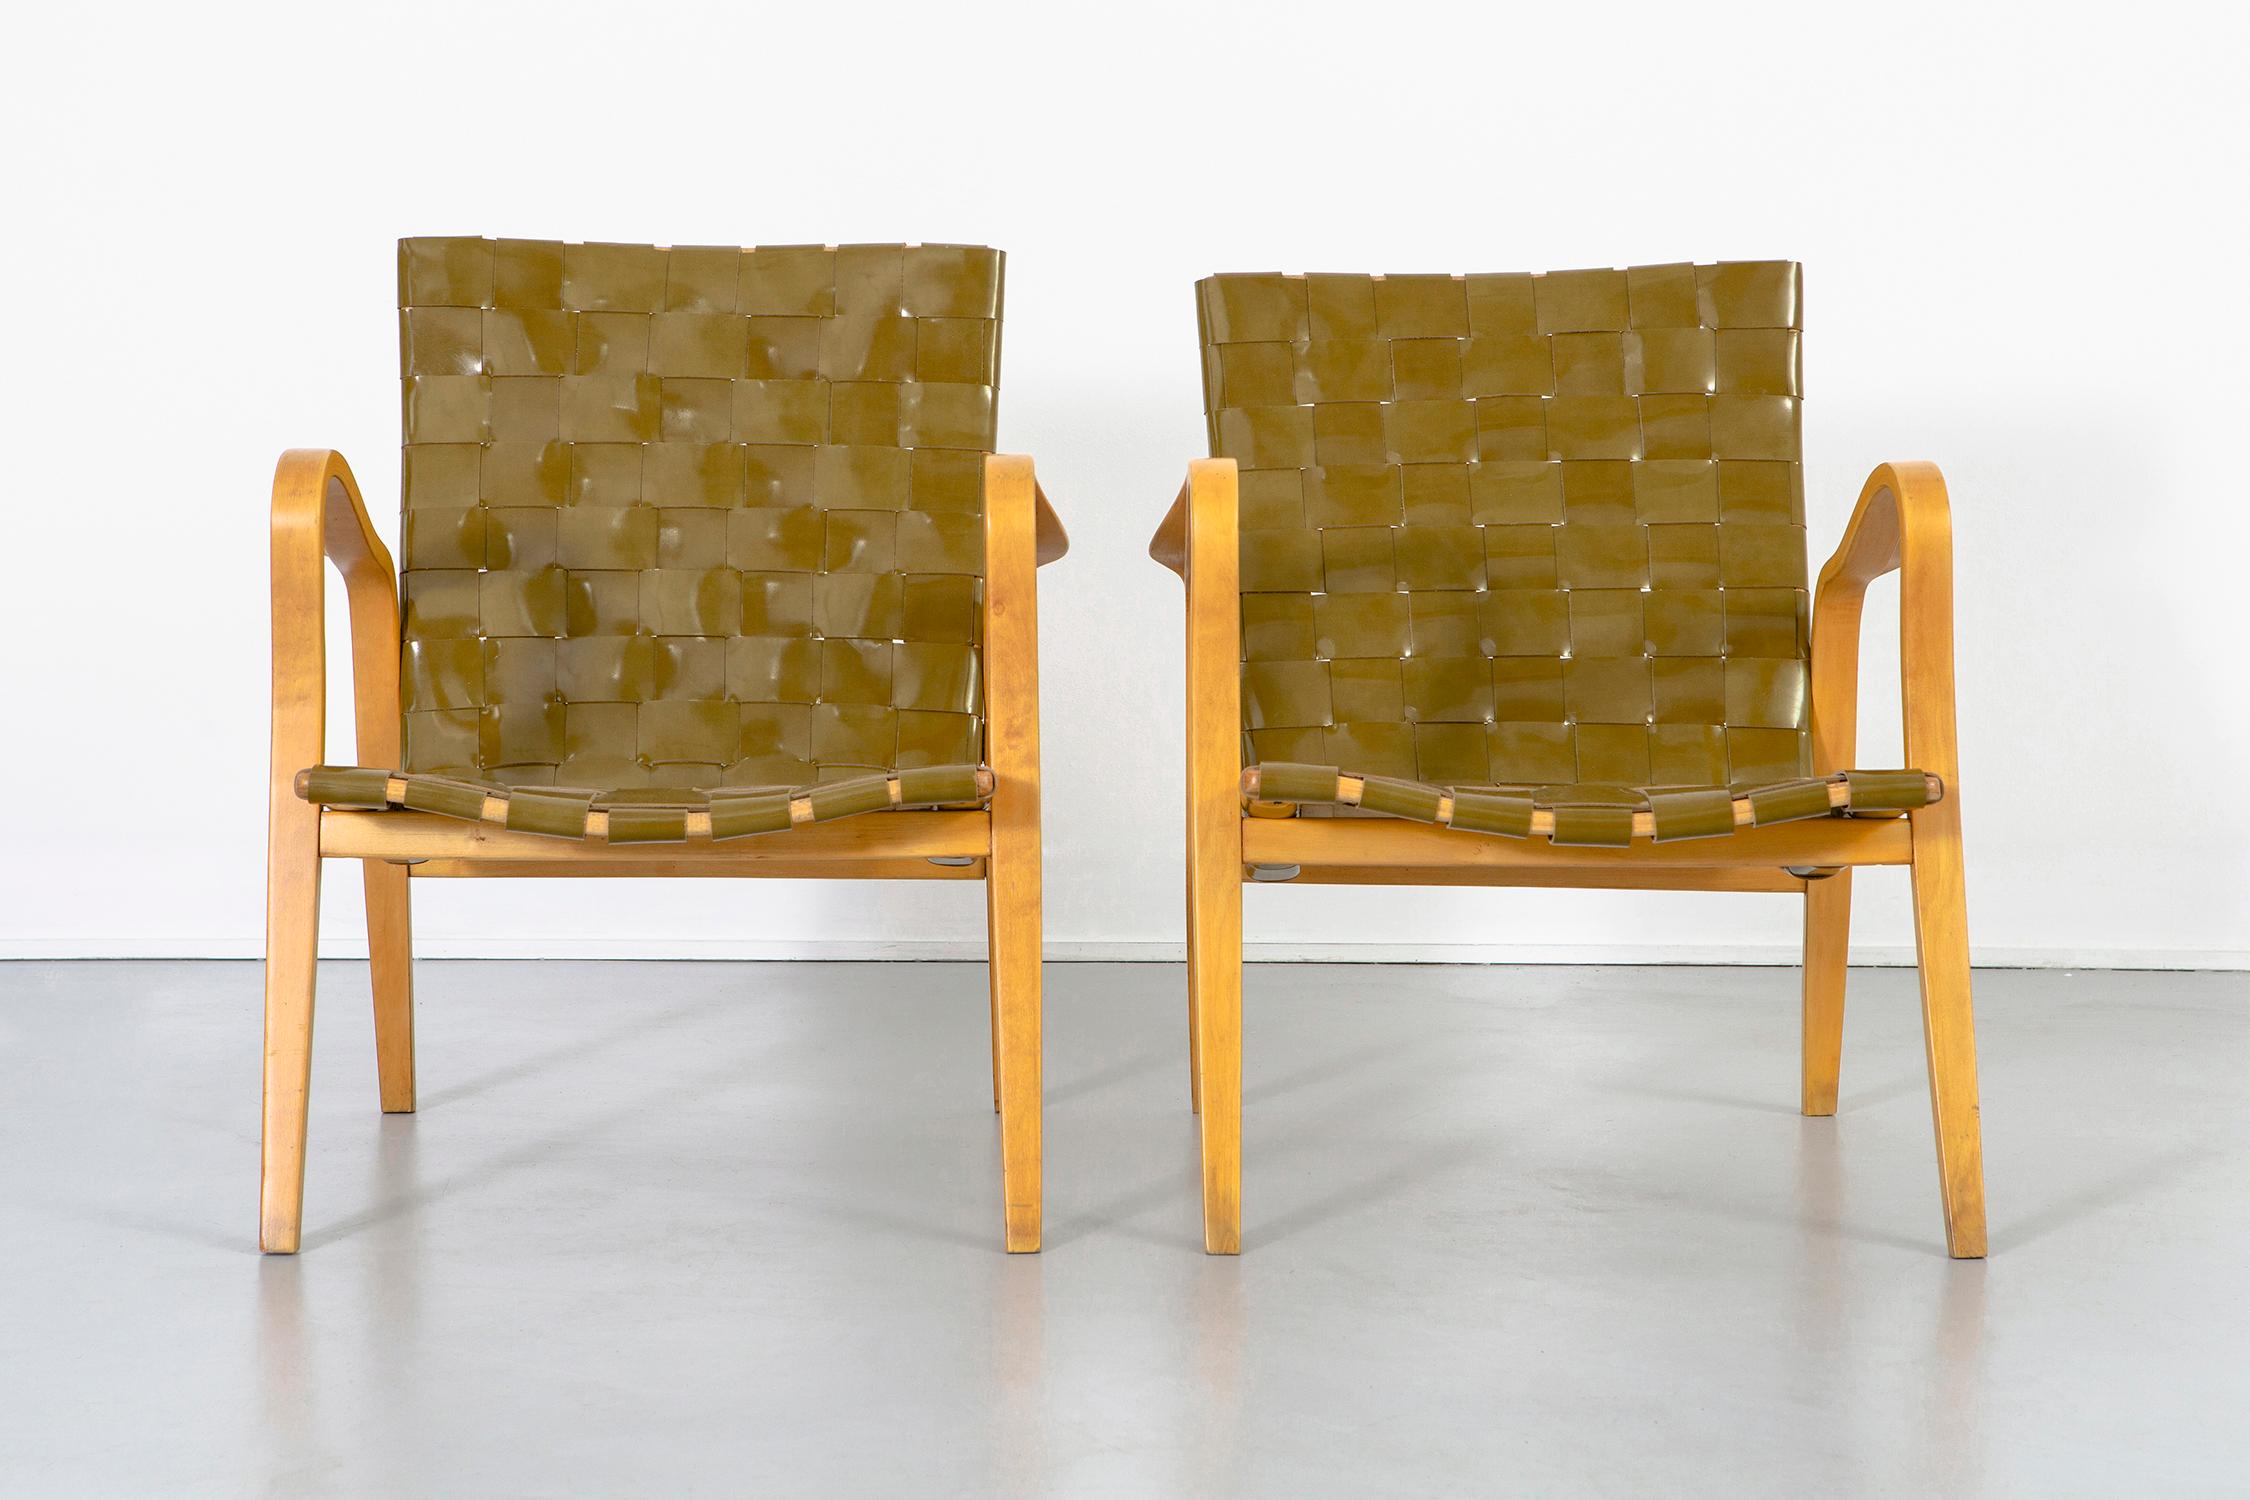 Set of two armchairs

Designed by Gustav Axel Berg

Sweden, circa 1940s

Birch and patent leather

Measures: 29 ?” H x 24 ¾” W x 26 ?” D x 14 ?” seat H

Fresh webbing in patent leather over the original birch frames.